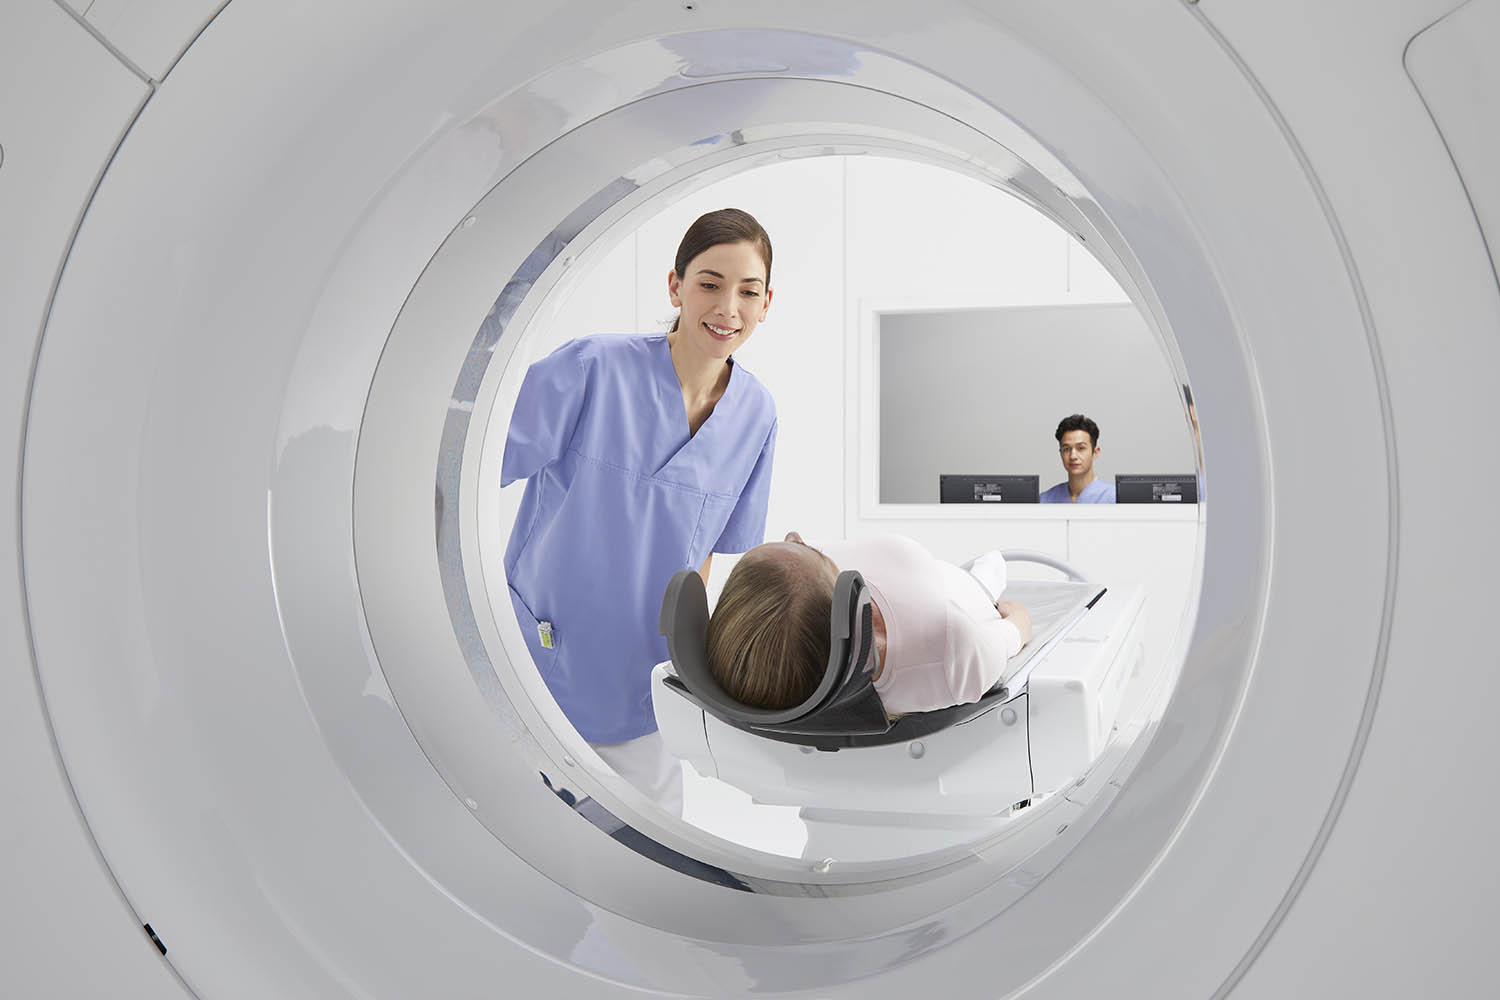 More than radiation therapy planning